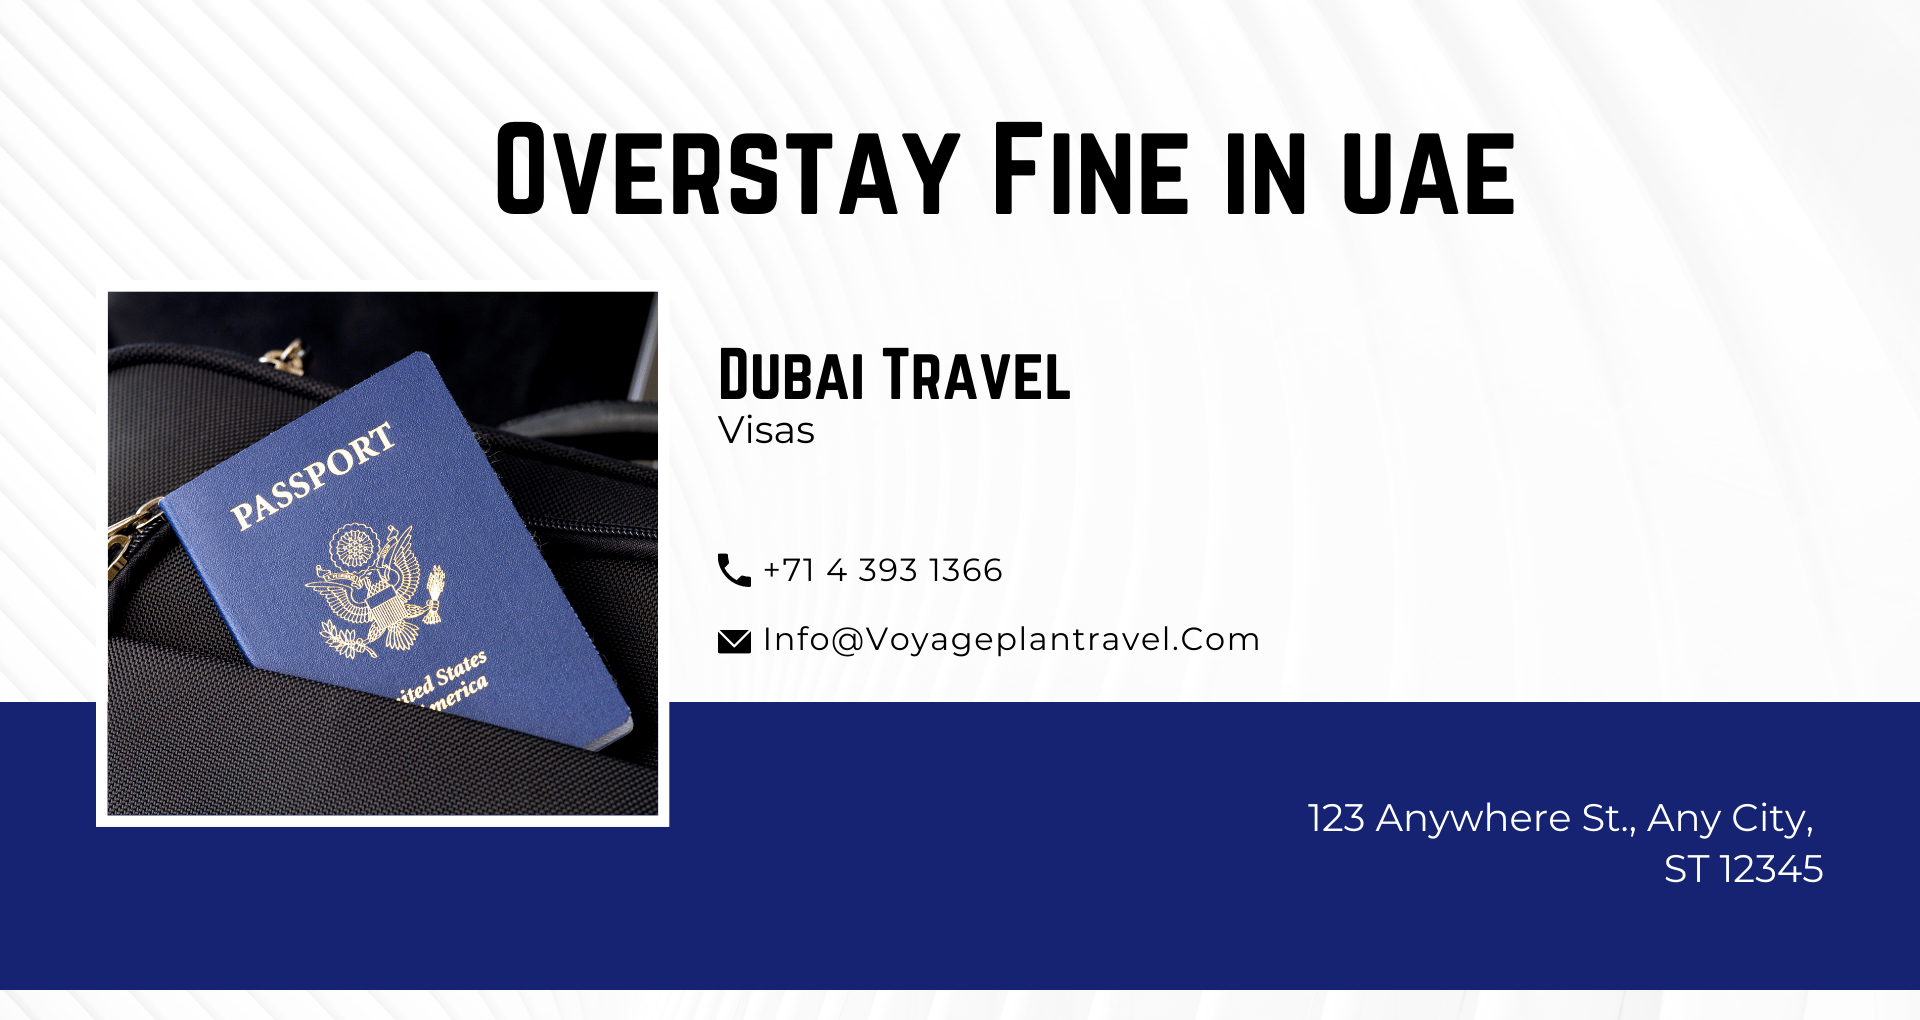 How to check to overstay fine in UAE